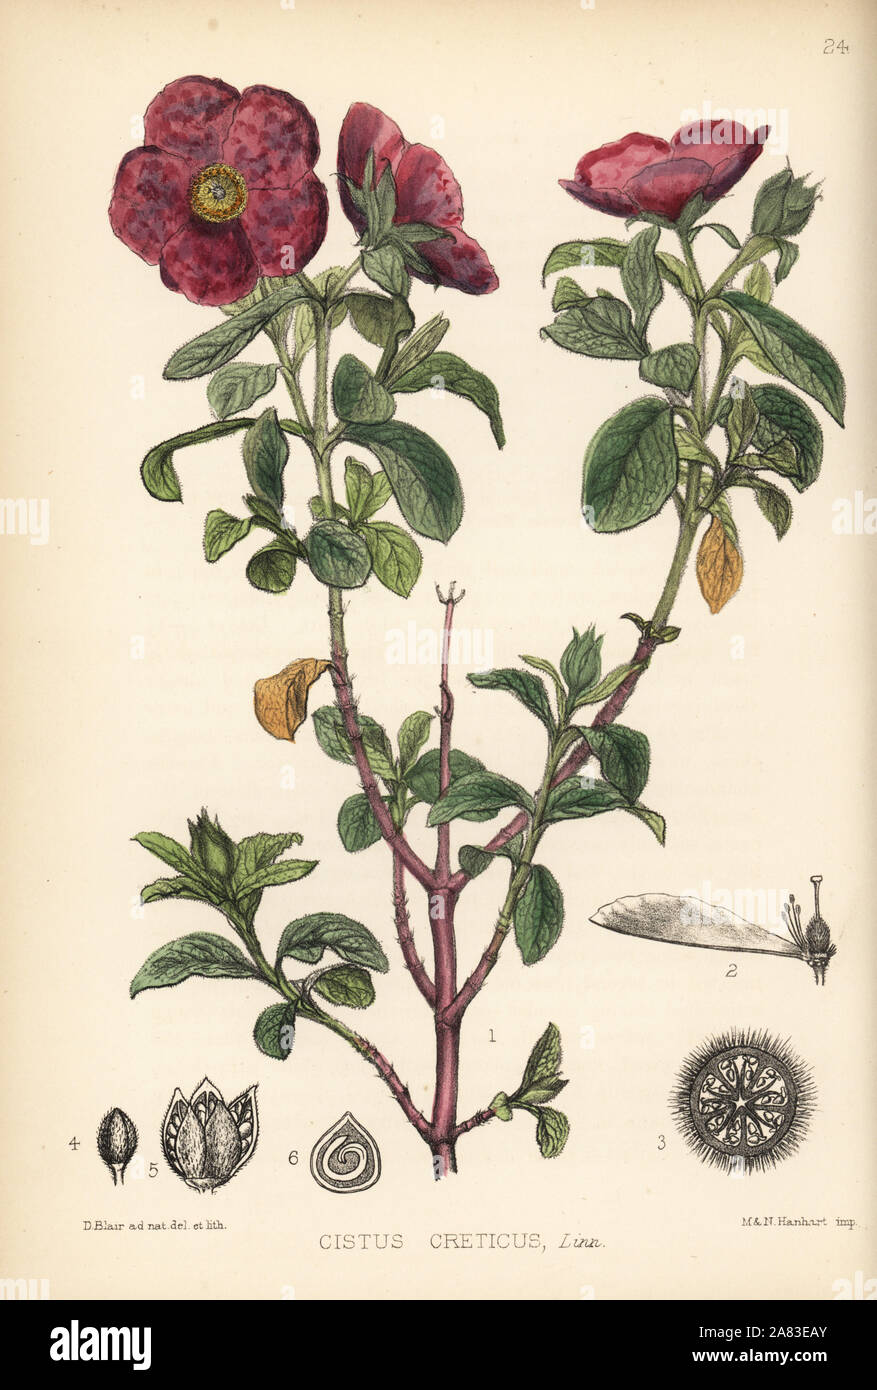 Pink rock-rose or ladano, Cistus creticus. Handcoloured lithograph by Hanhart after a botanical illustration by David Blair from Robert Bentley and Henry Trimen's Medicinal Plants, London, 1880. Stock Photo